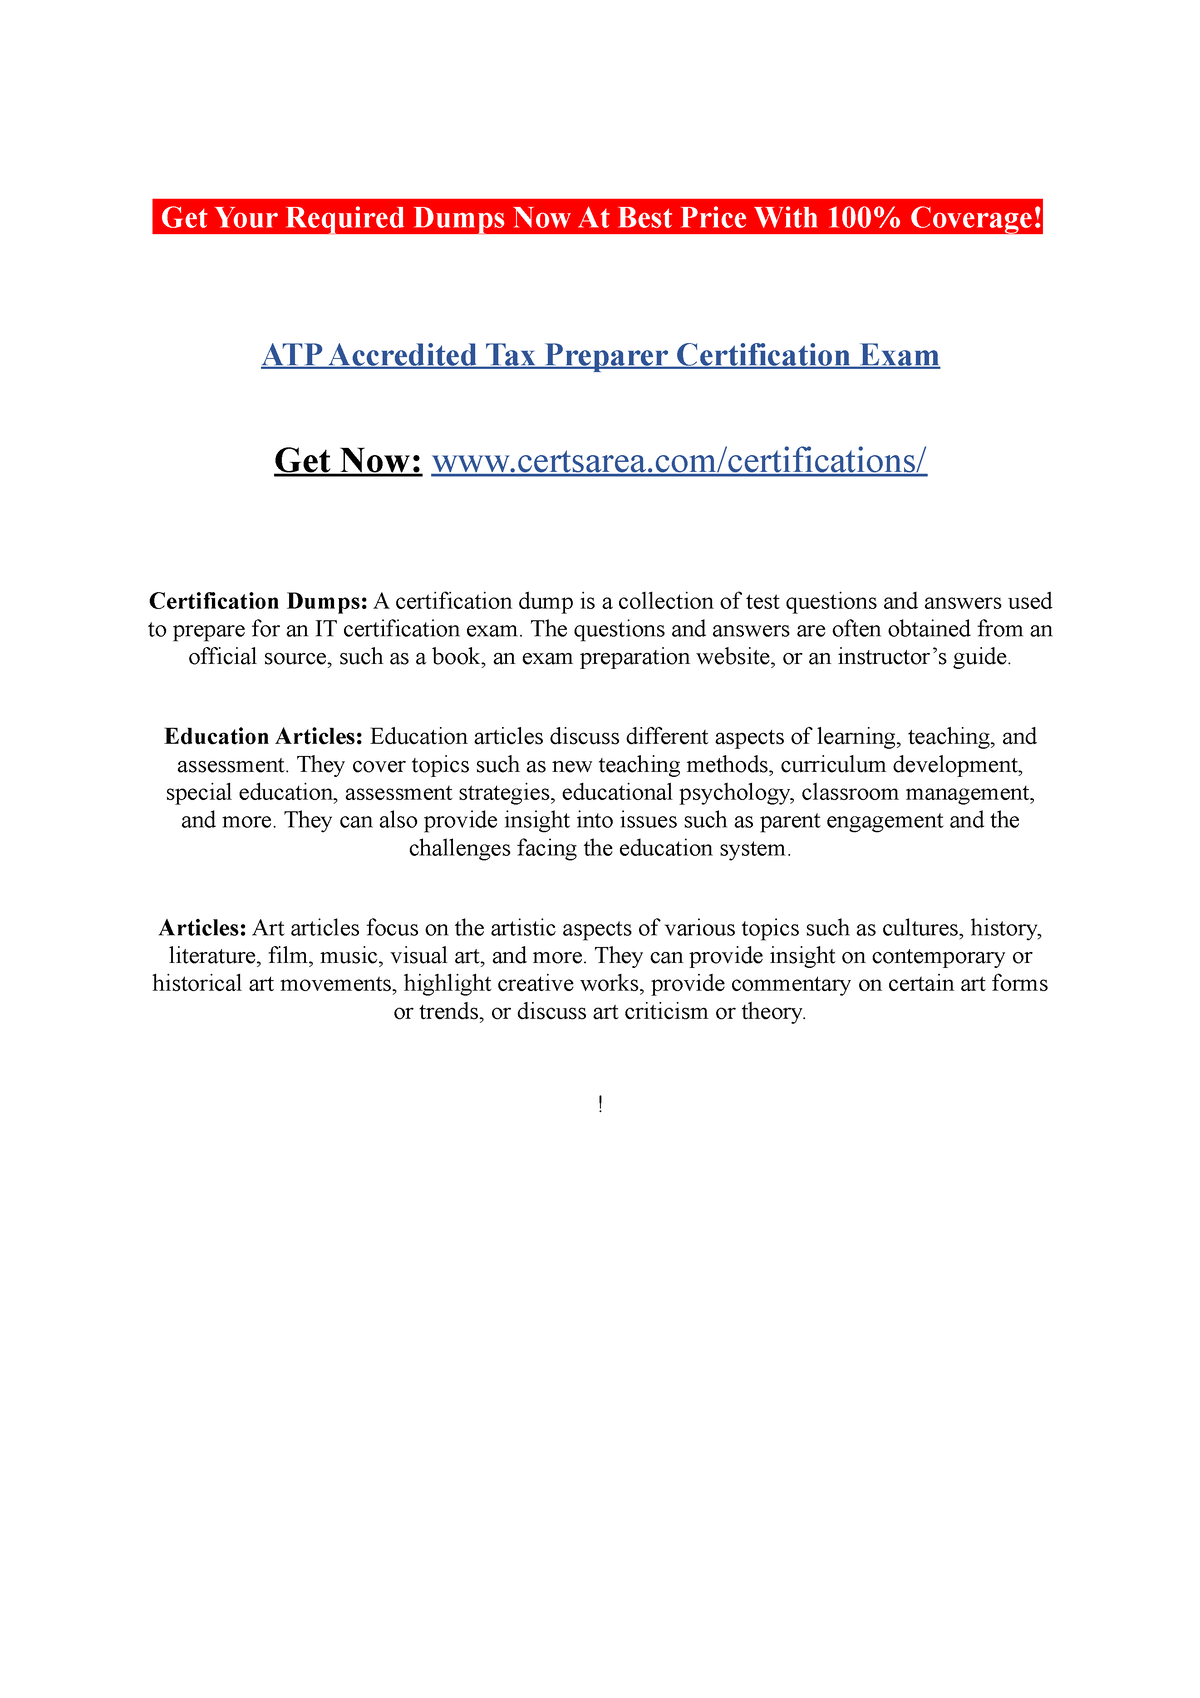 ATP Accredited Tax Preparer Certification Exam Get Your Required